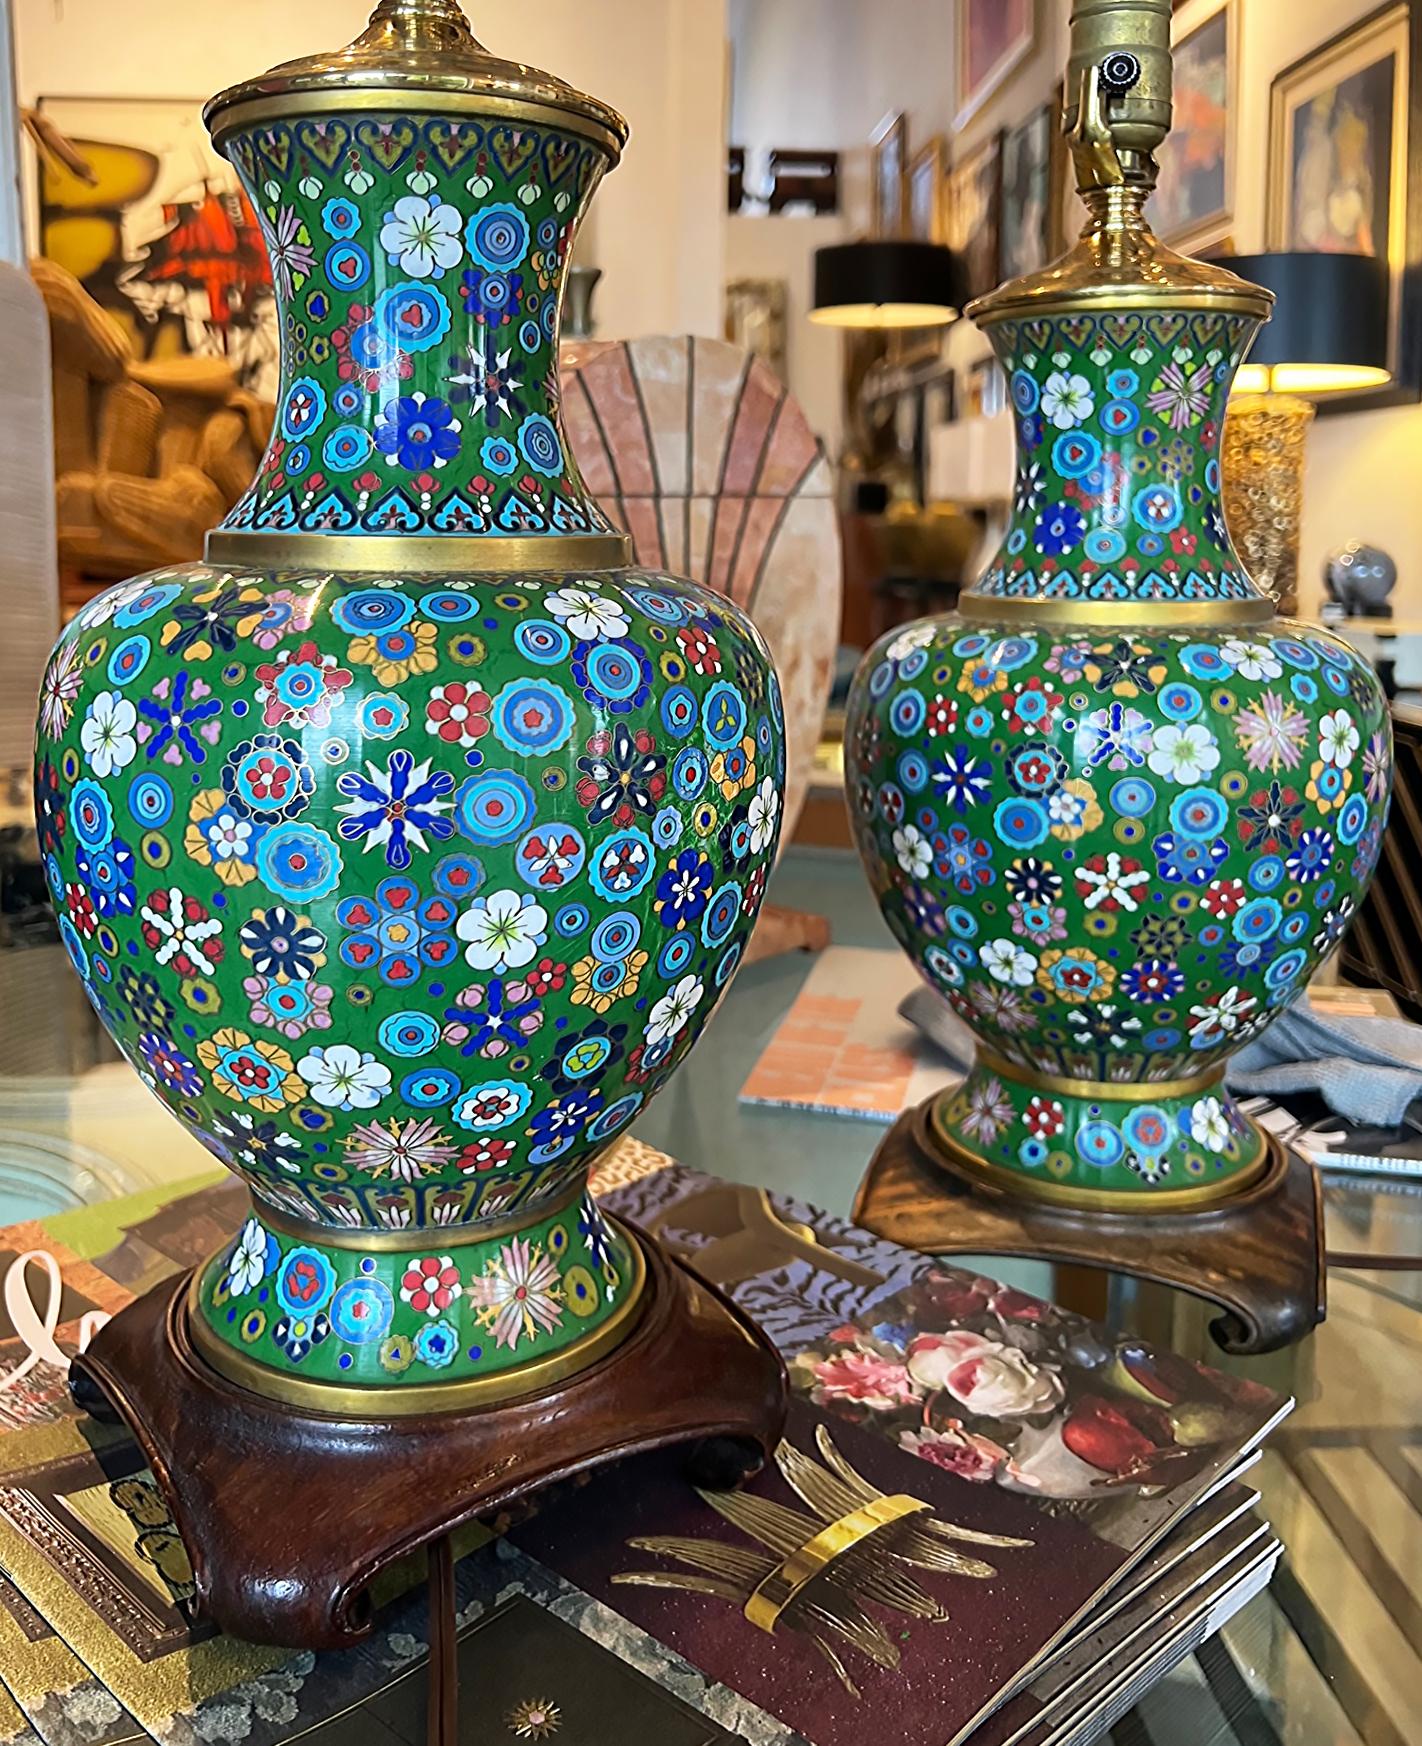 Pair of Mid-century Chinese Cloisonne Urns Table Lamps on Wood Bases

Offered for sale is a lovely colorful pair of Chinese Cloisonne urns that have been fitted into table lamps and mounted upon wood bases. The Cloisonne urns are in very good